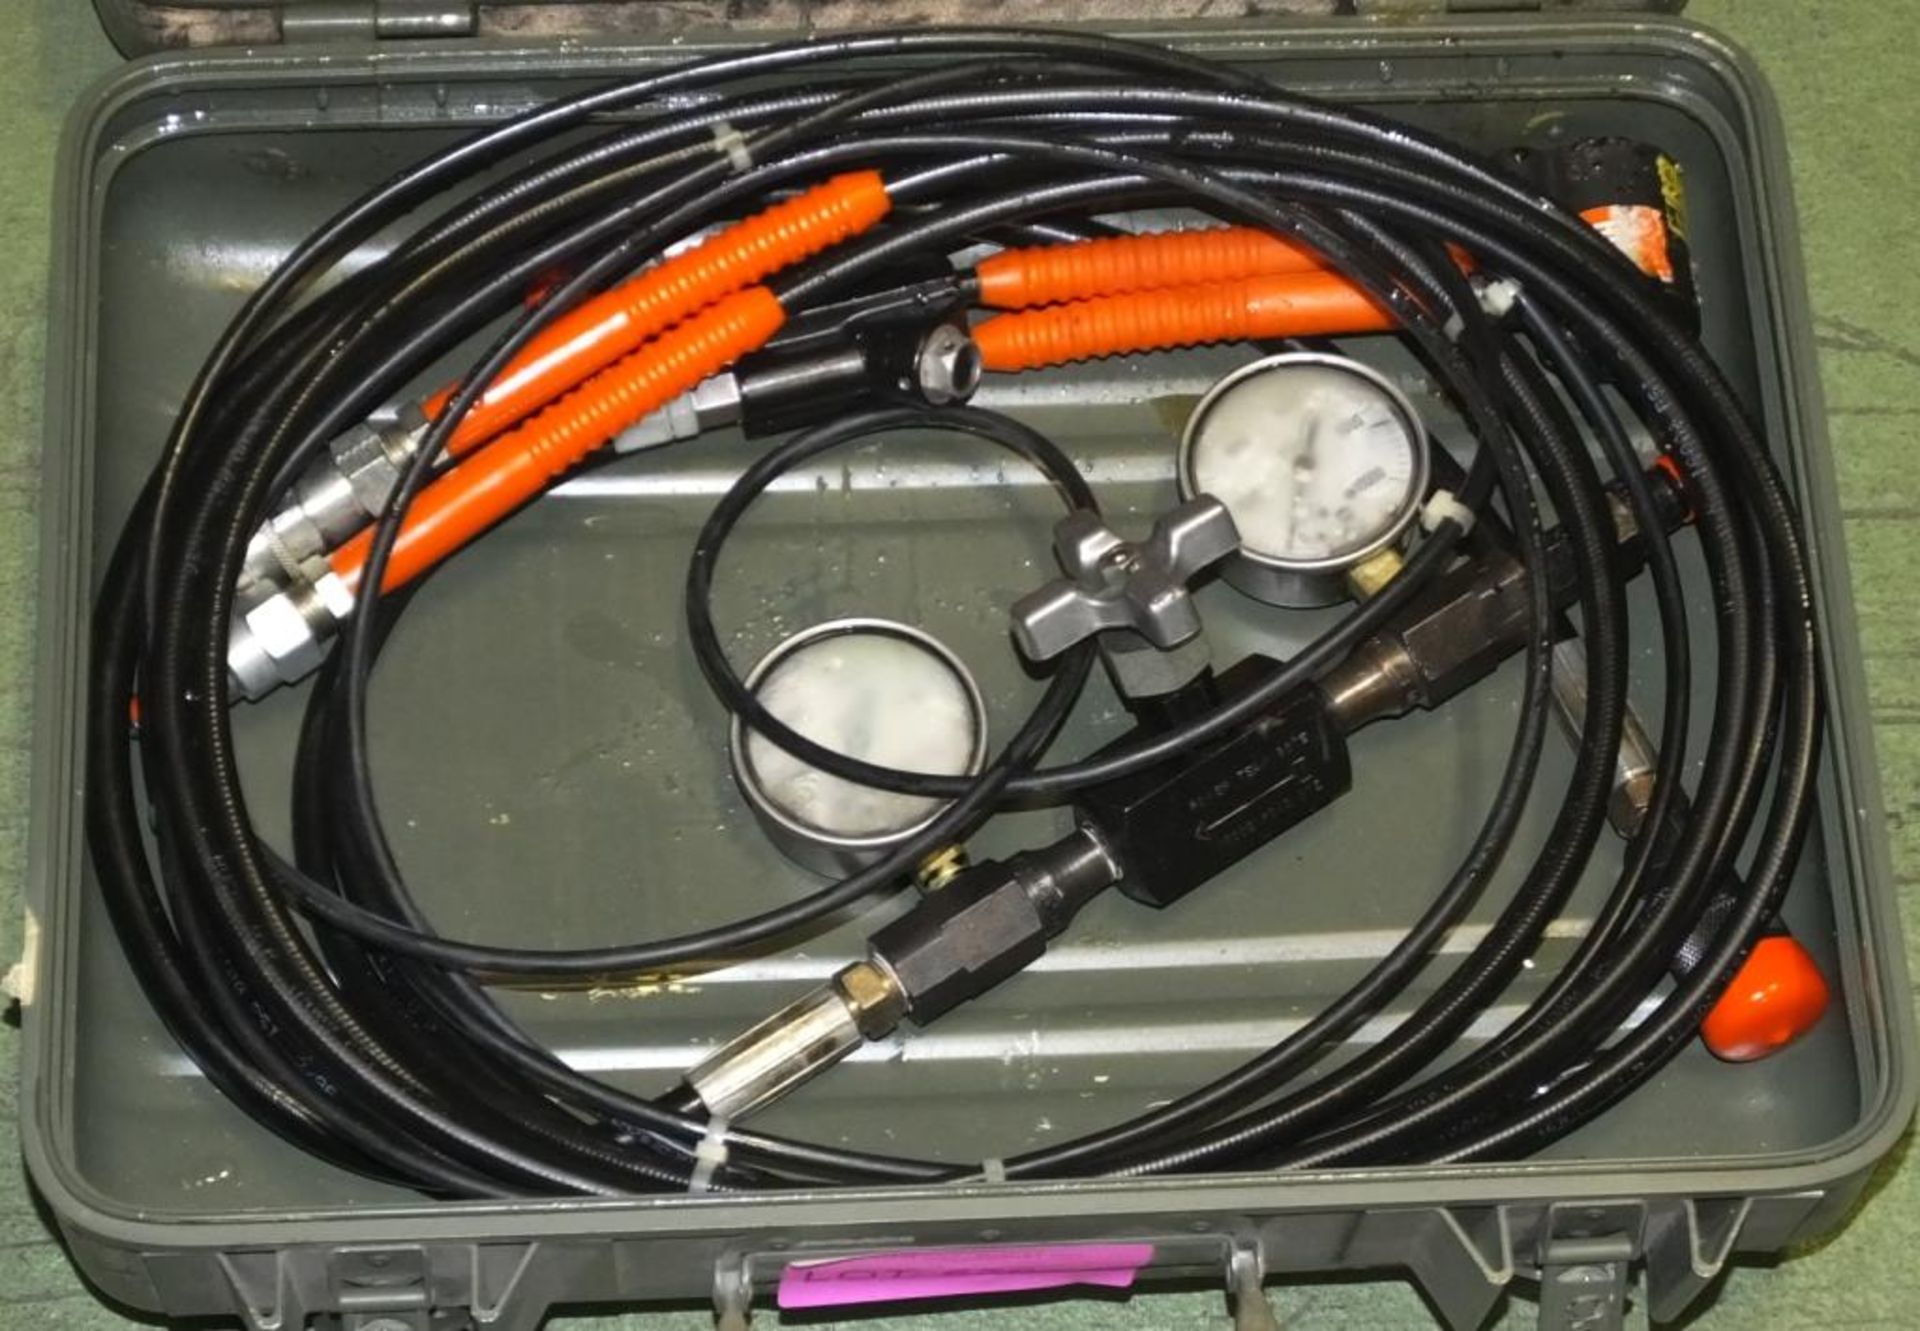 Huck Bolt Hydraulic Installation Tool Kit In A Case - Image 2 of 6